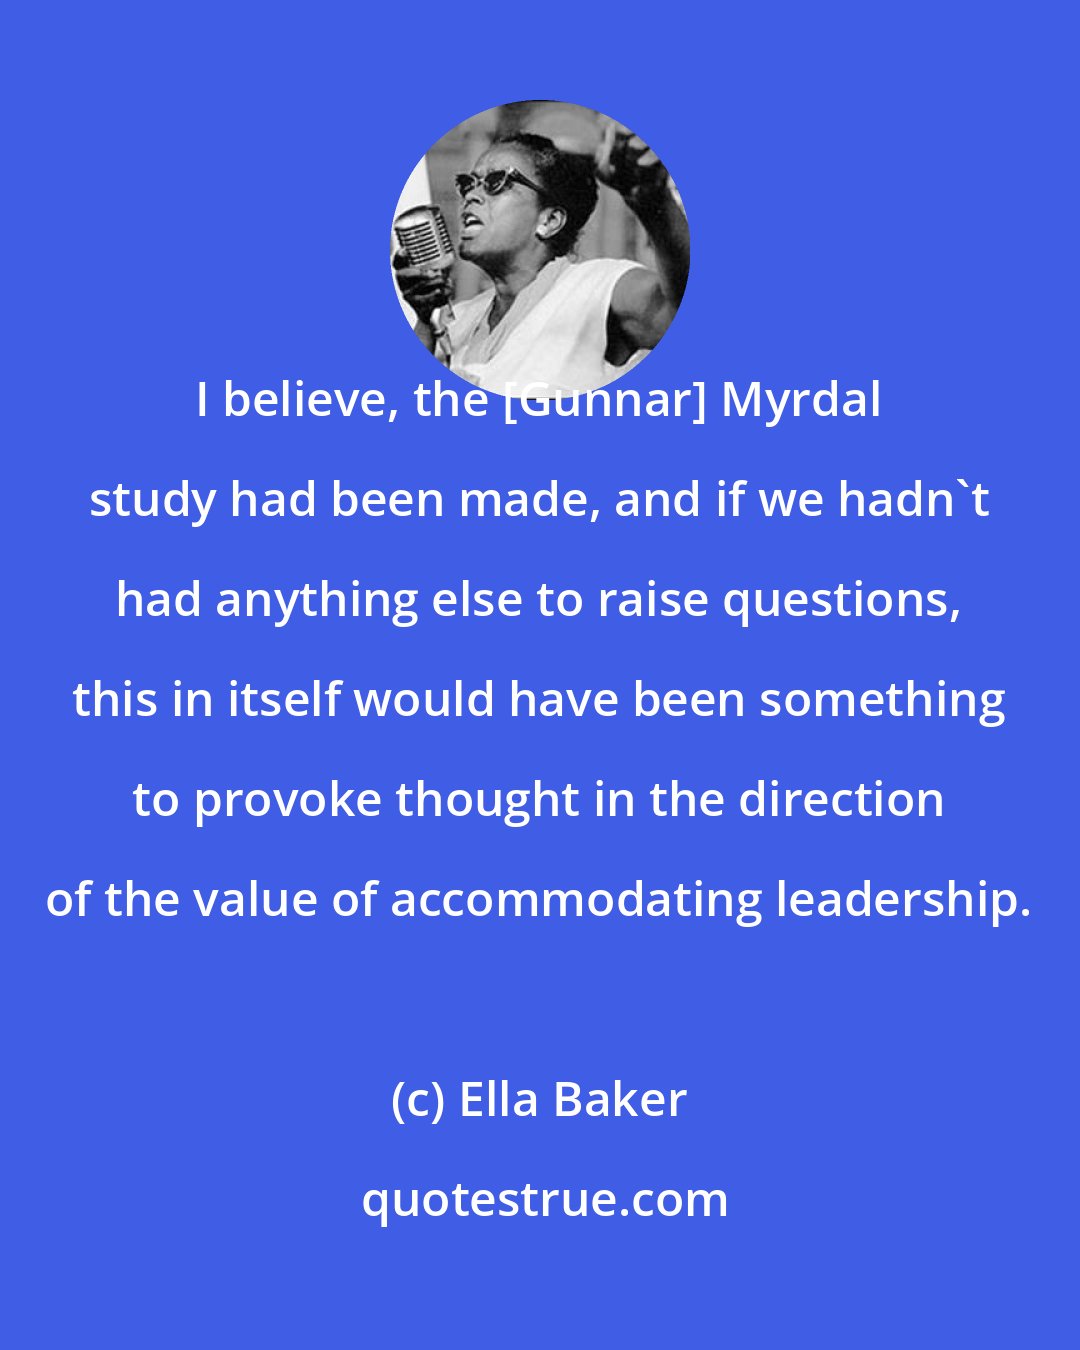 Ella Baker: I believe, the [Gunnar] Myrdal study had been made, and if we hadn't had anything else to raise questions, this in itself would have been something to provoke thought in the direction of the value of accommodating leadership.